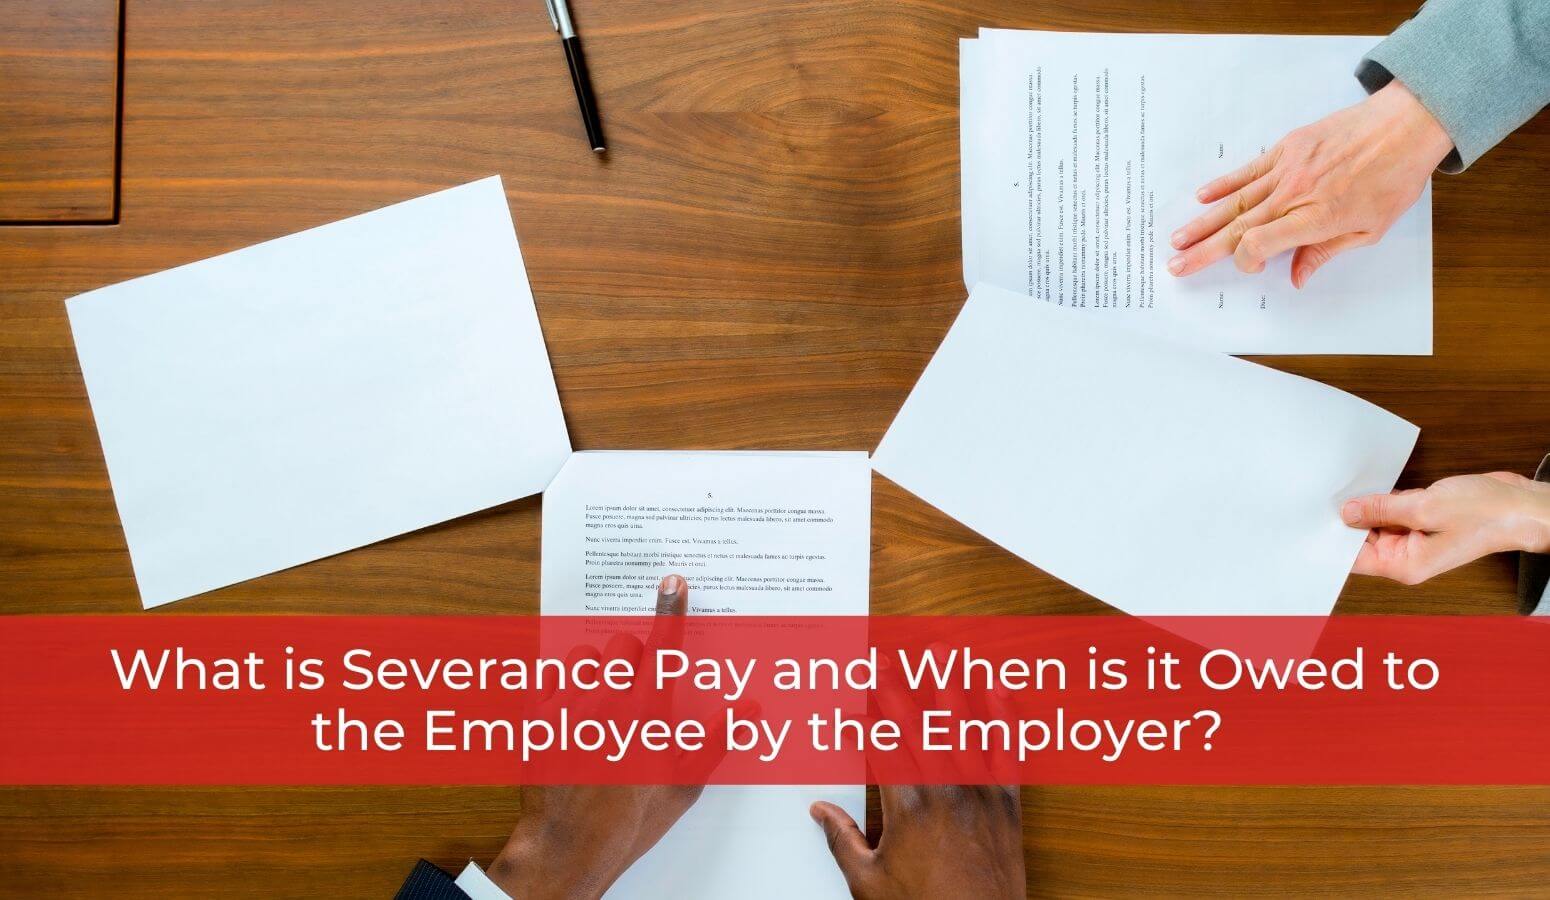 Featured image for “What is Severance Pay and When is it Owed to the Employee by the Employer?”